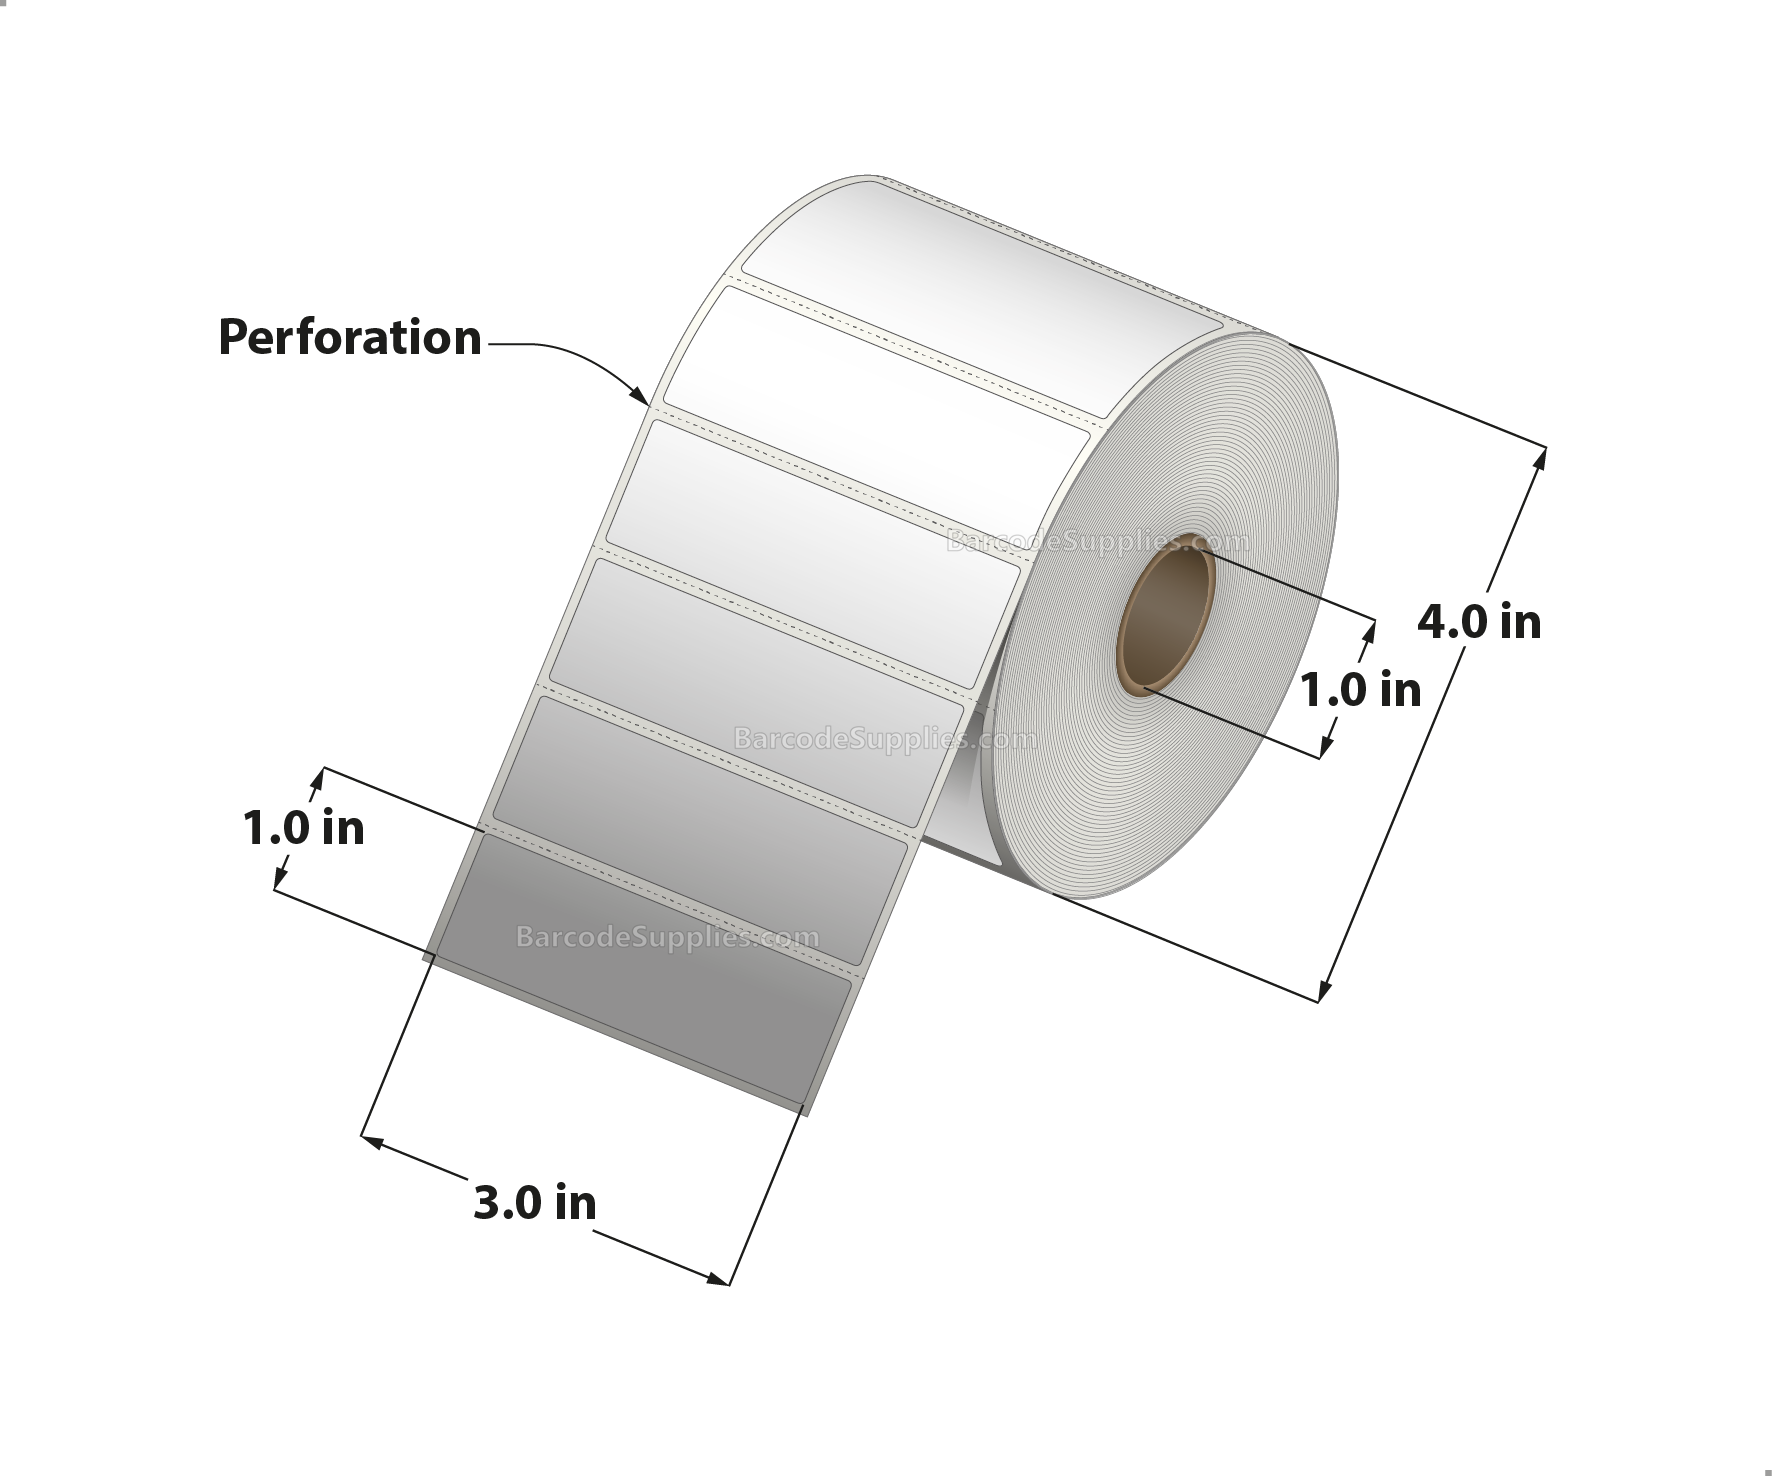 3 x 1 Thermal Transfer White Labels With Rubber Adhesive - Perforated - 1310 Labels Per Roll - Carton Of 12 Rolls - 15720 Labels Total - MPN: RTT4-300100-1P